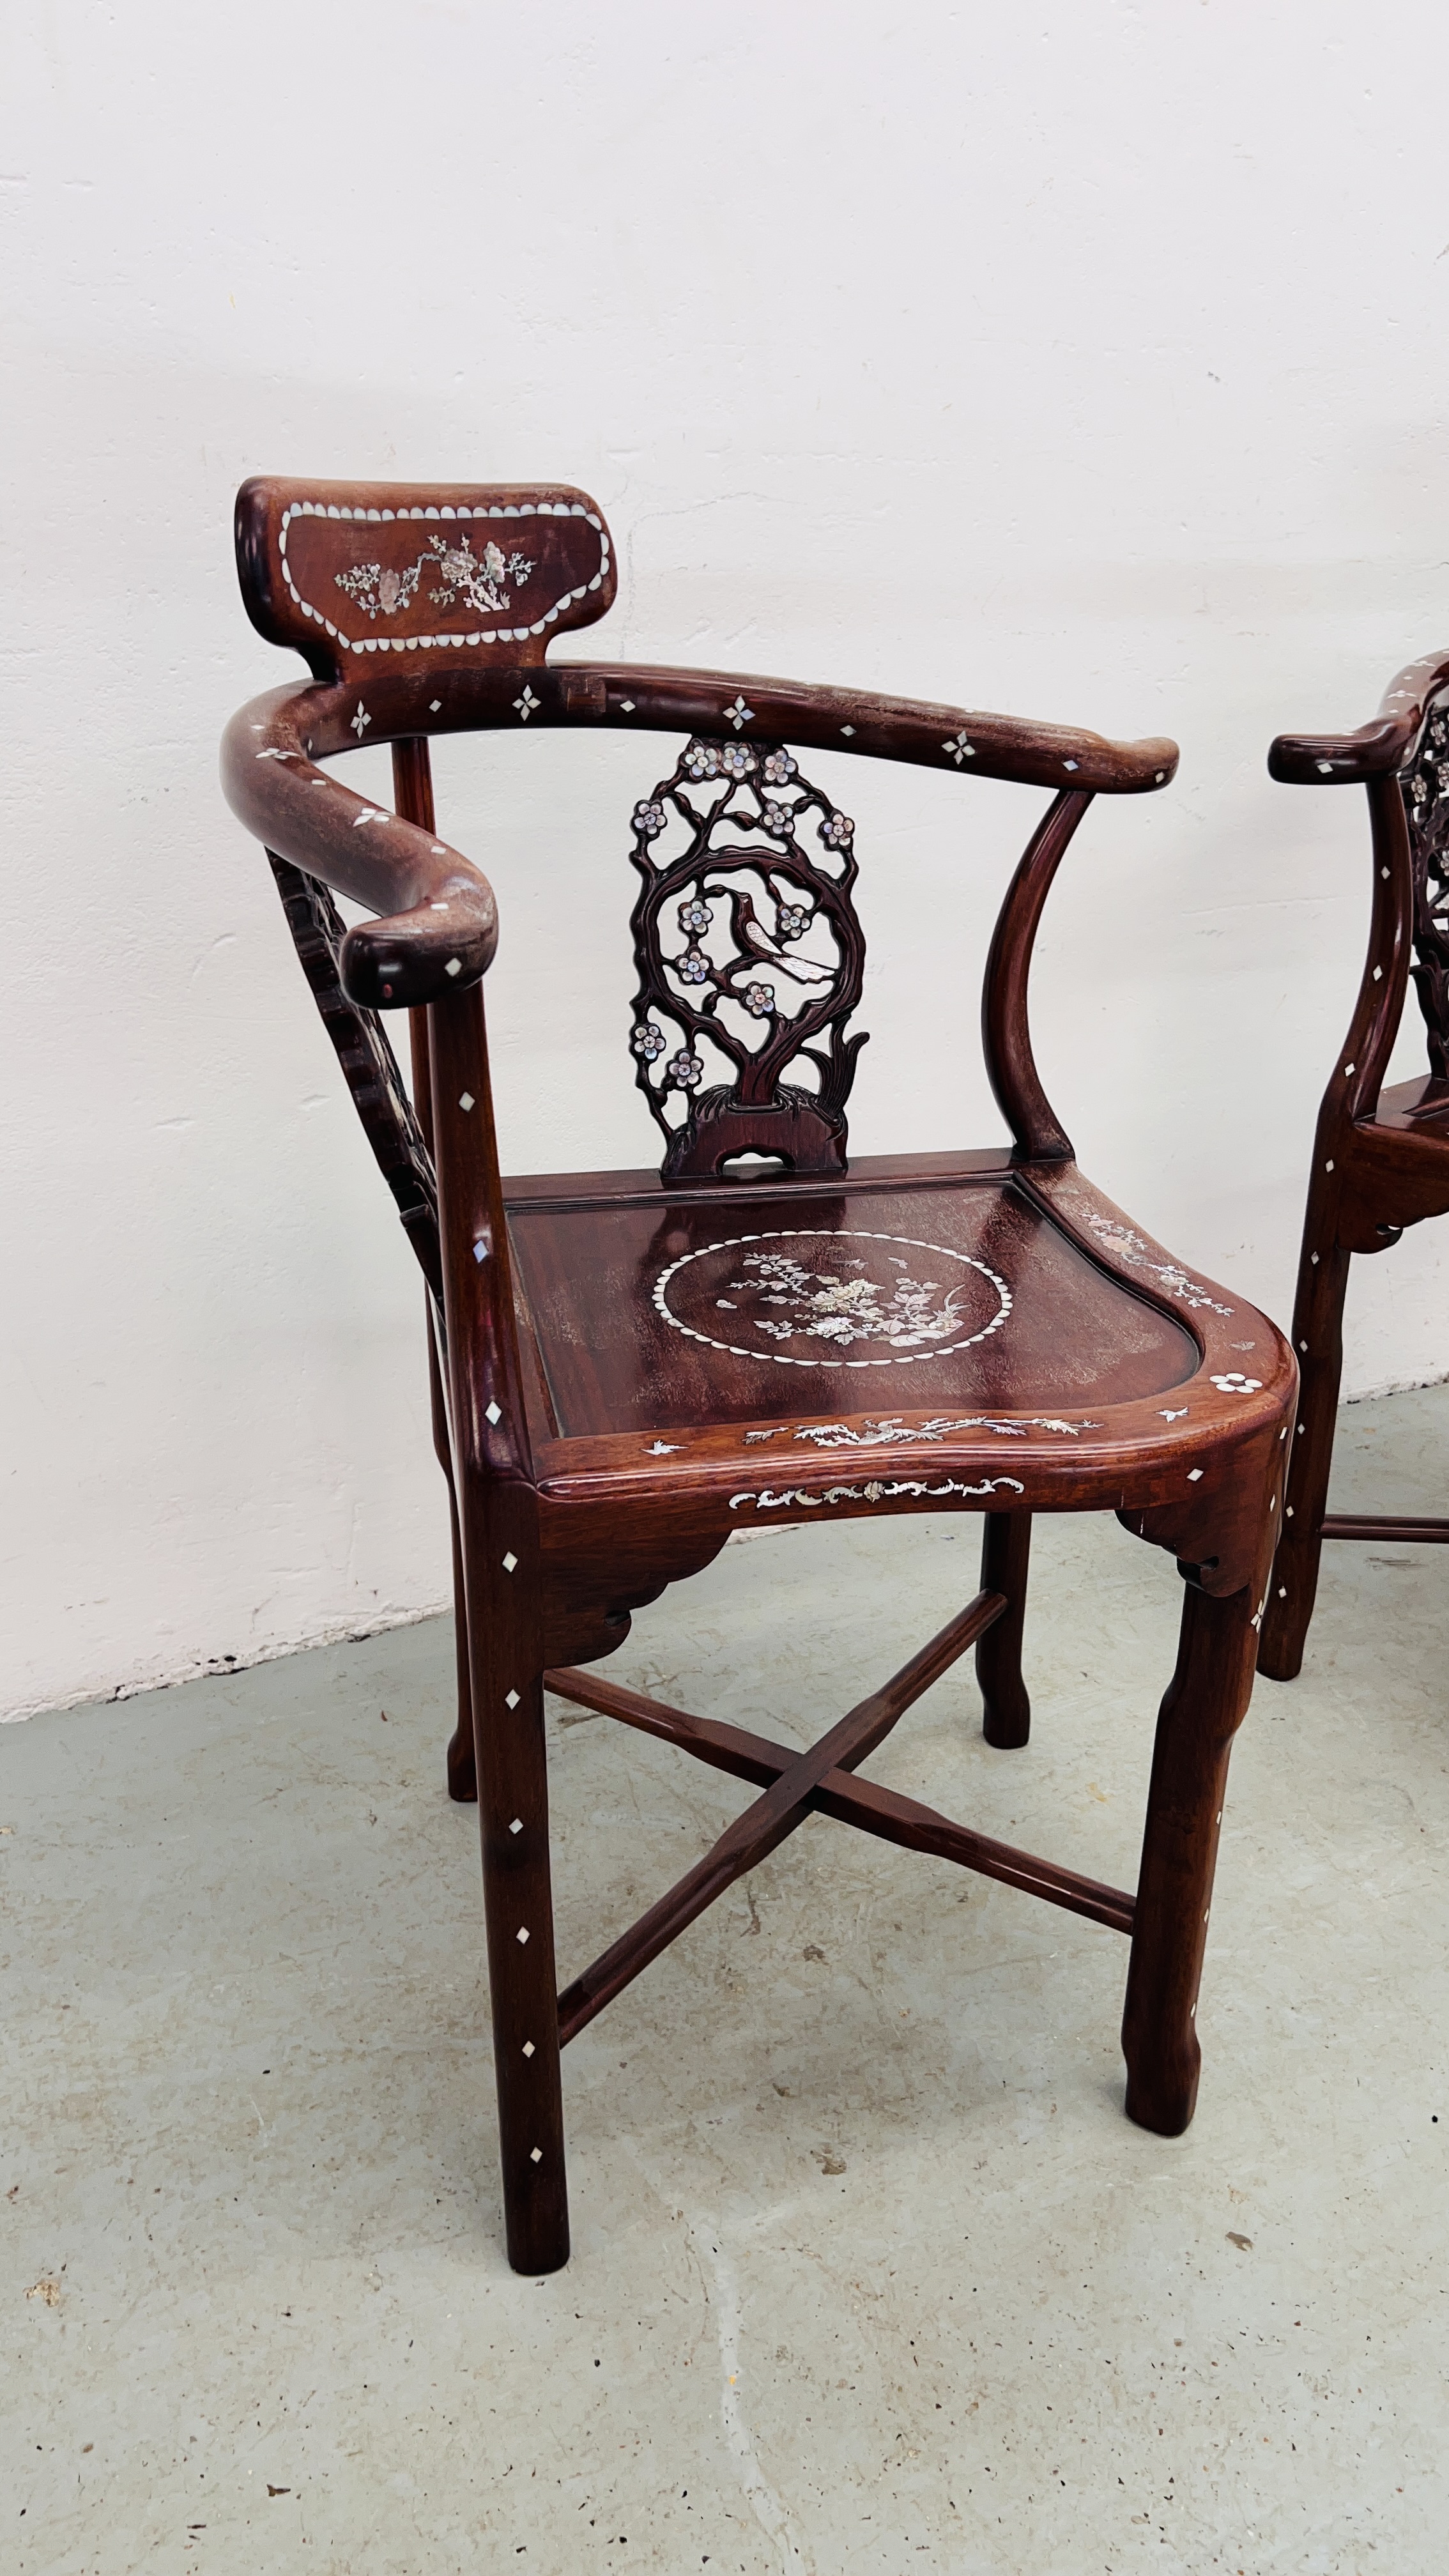 A PAIR OF ORIENTAL HARDWOOD AND MOTHER OF PEARL INLAID CORNER CHAIRS. - Image 14 of 14